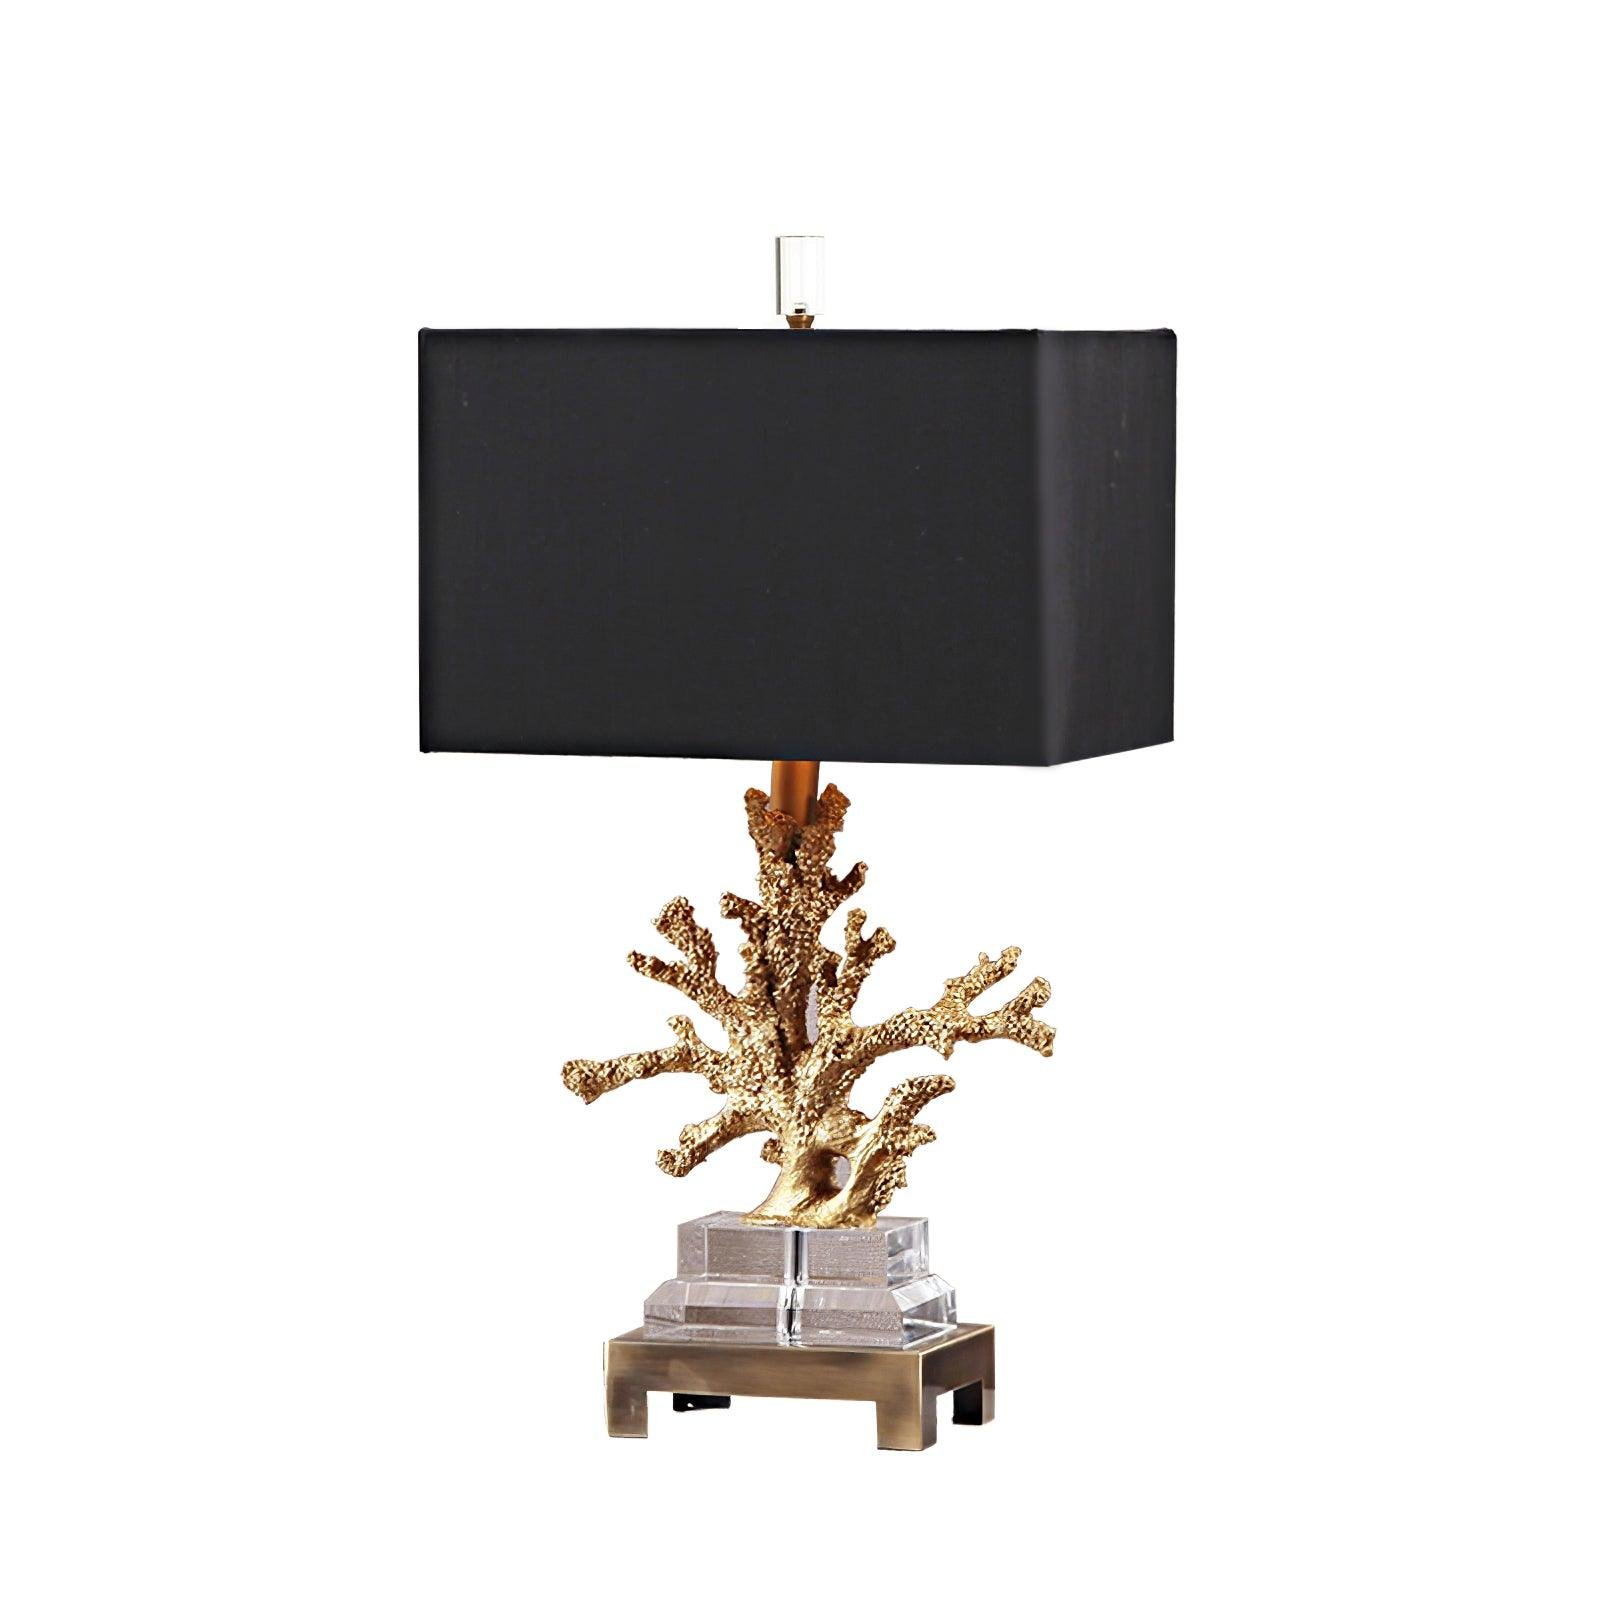 Black Coral Table Lamp with a diameter of 14.2 inches and a height of 26.8 inches (36cm x 68cm) featuring an EU plug.